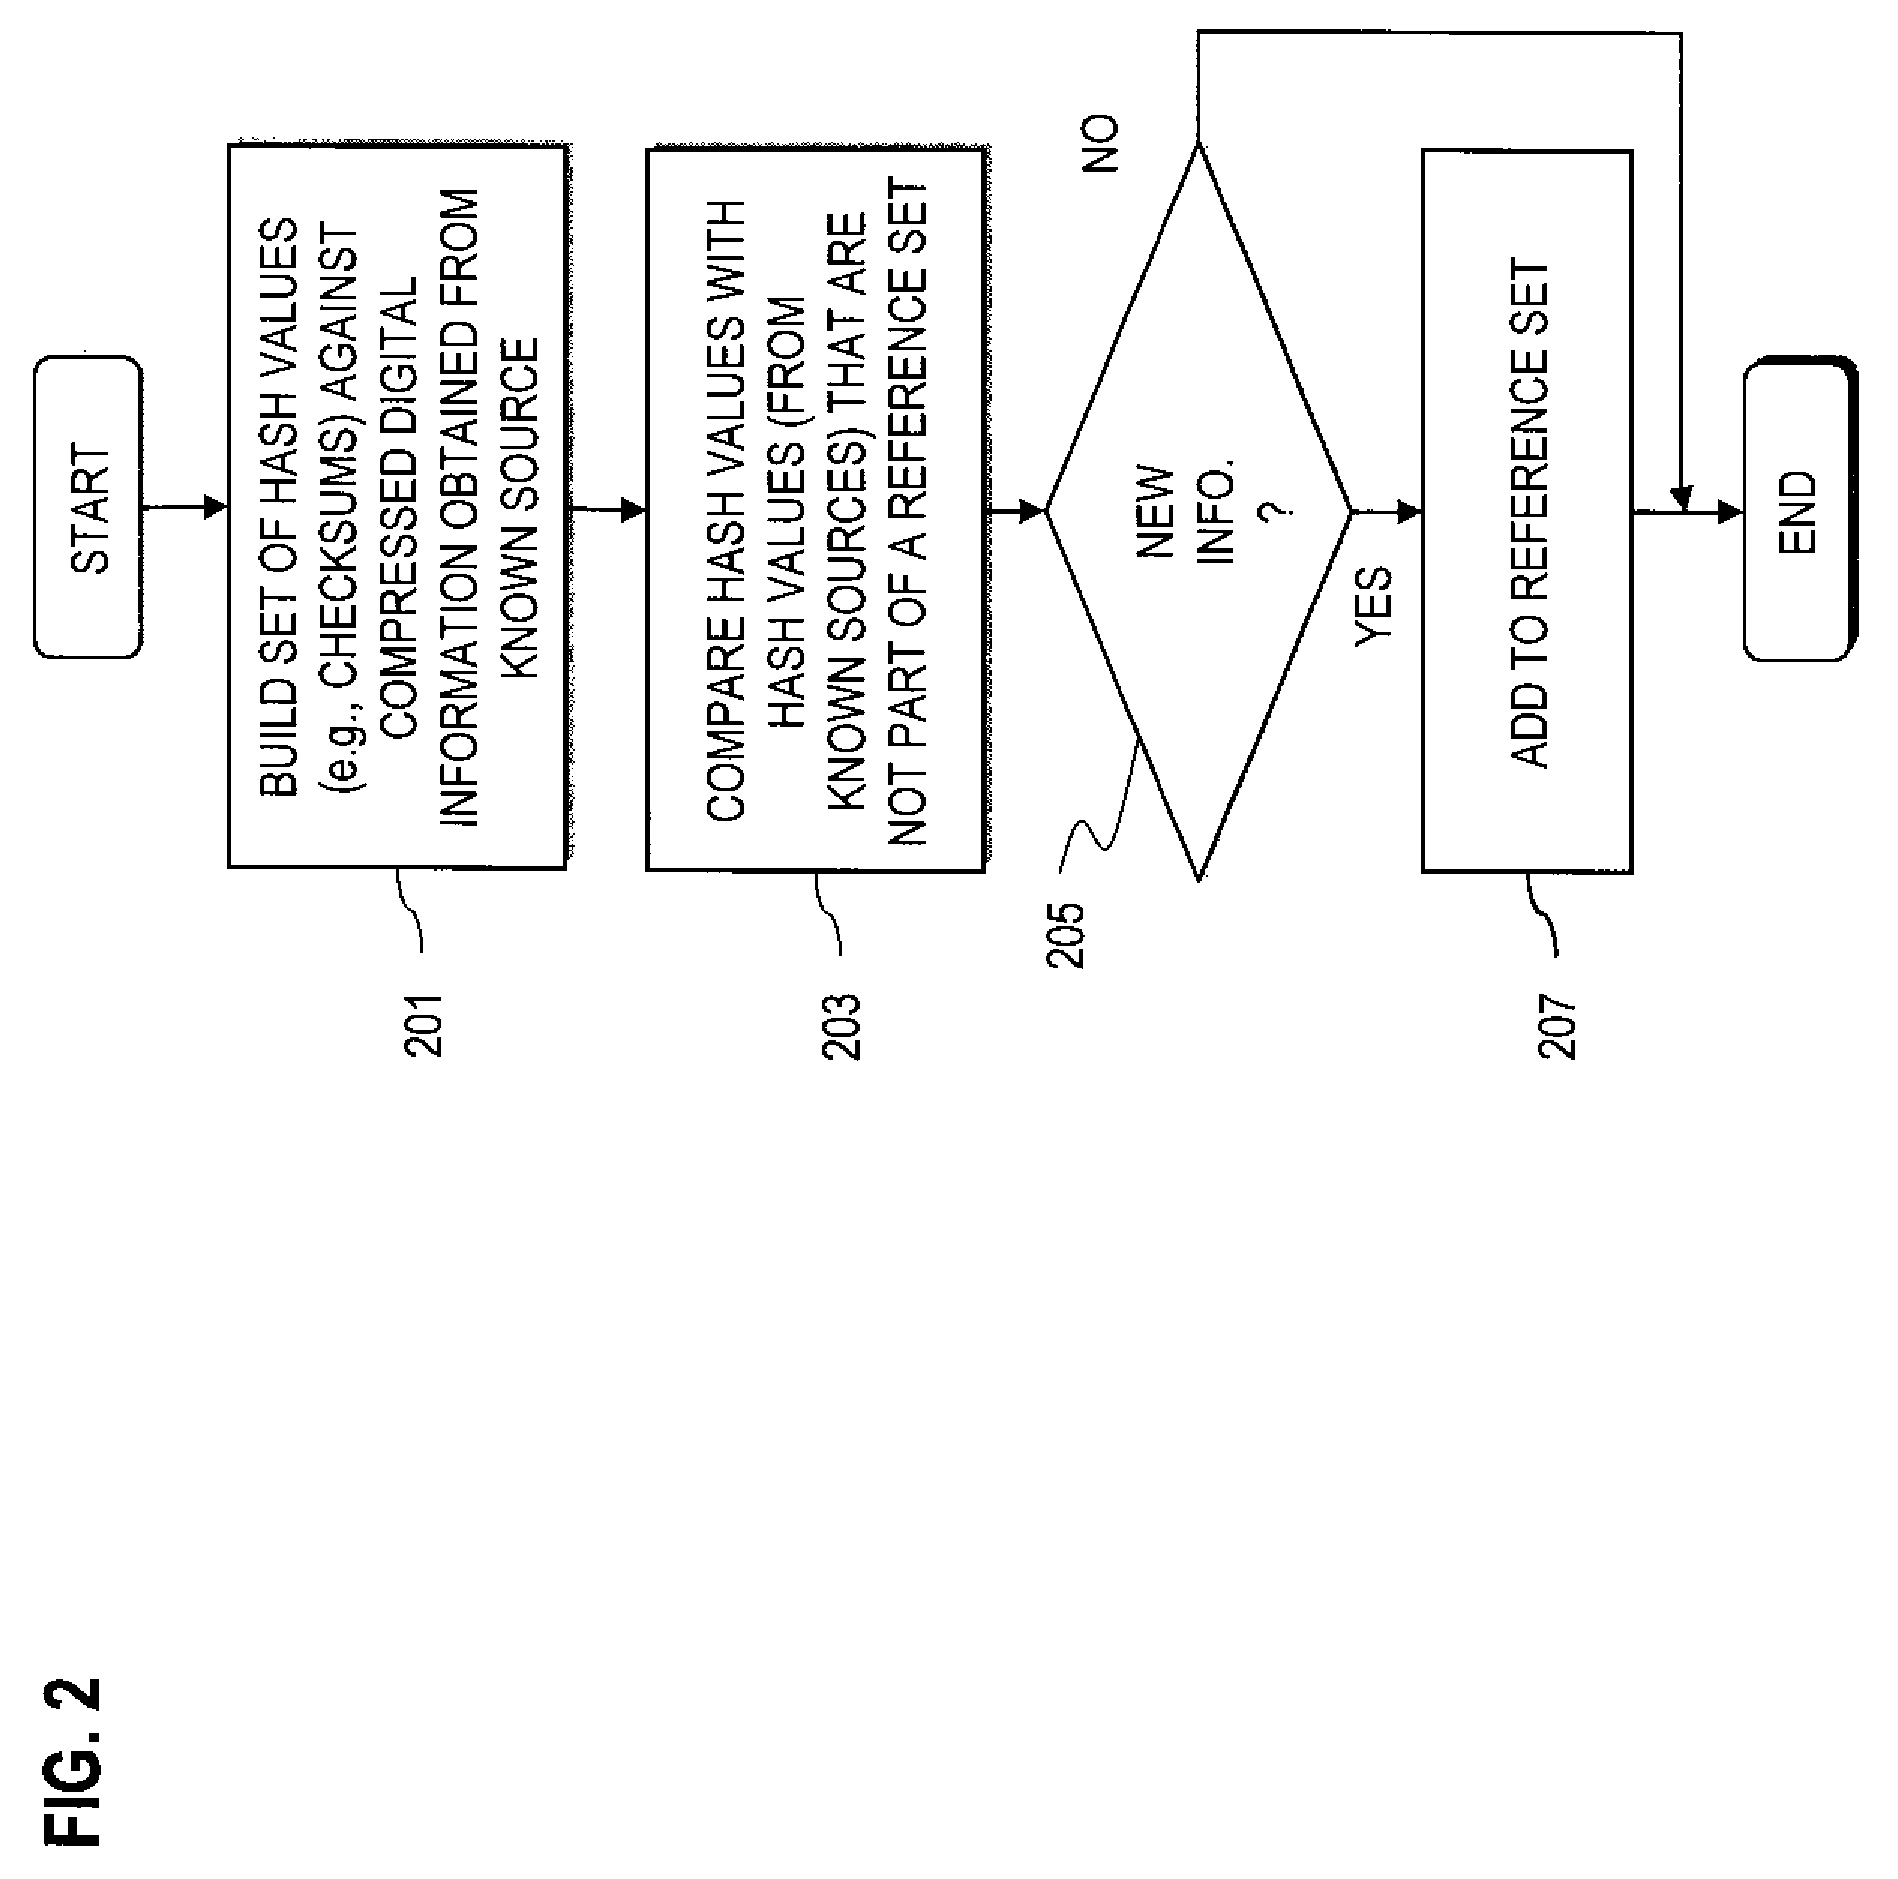 Method and system for providing image processing to track digital information